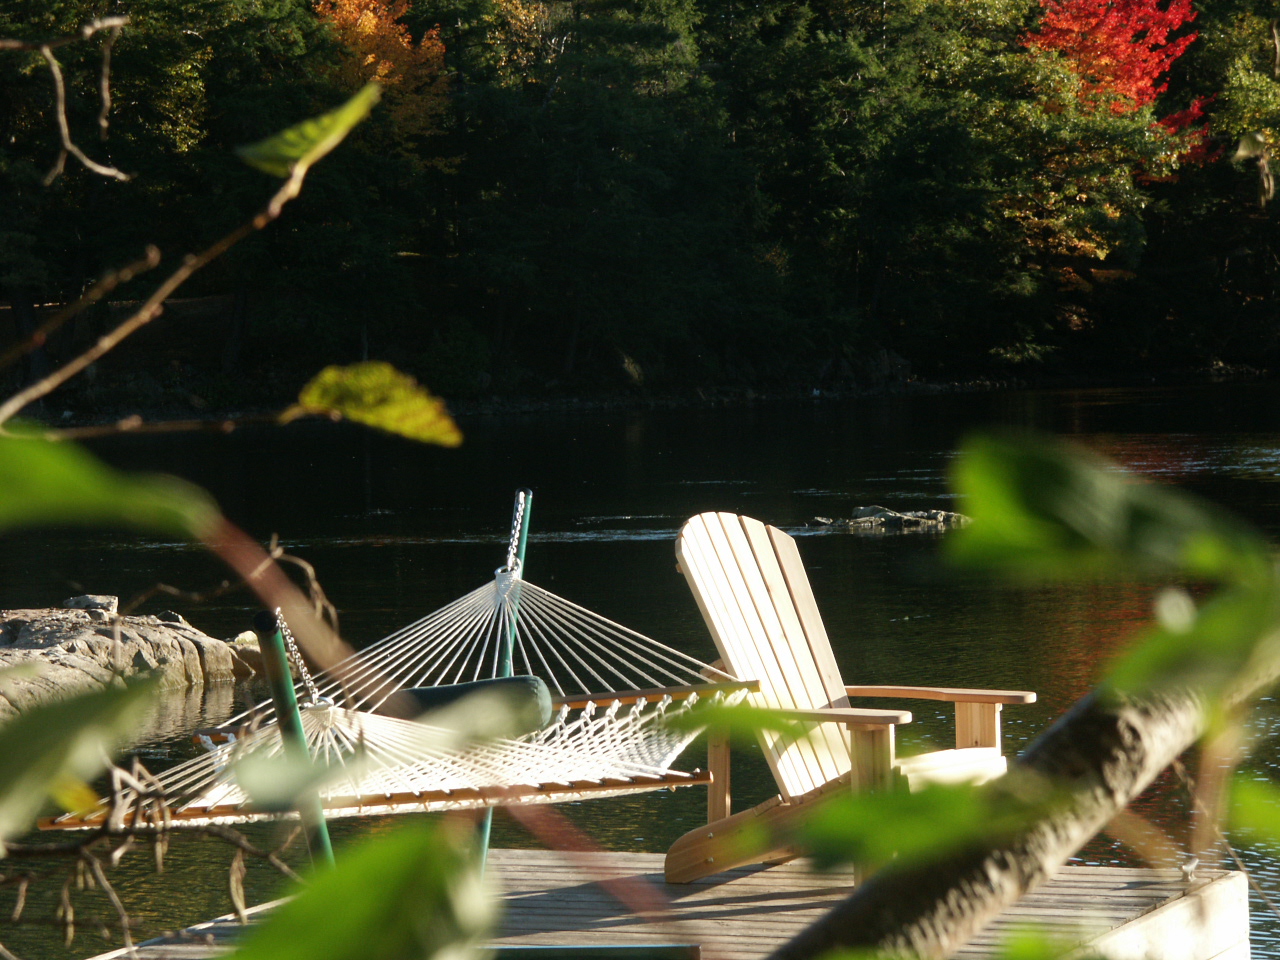 deluxe Bougainville hammock and comfy Muskoka chair on the dock